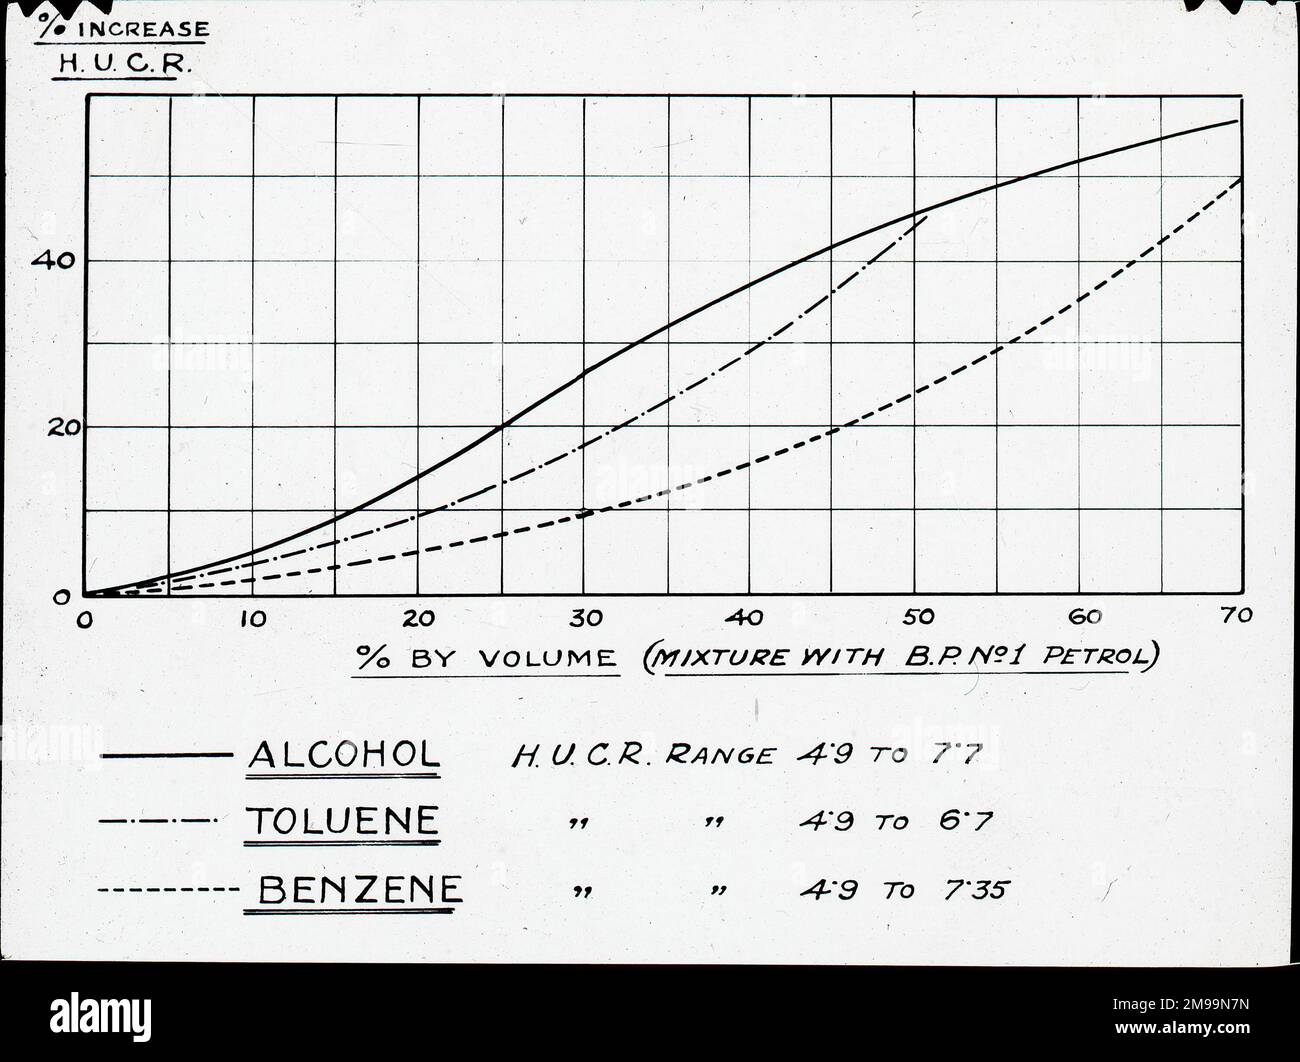 Chart showing % increase H.U.C.R. Alcohol, Toluene, Benzine. William Francis Forbes-Sempill, 19th Lord Sempill AFC, AFRAeS (1893-1965) was a Scottish peer and record-breaking air pioneer who was later shown to have passed secret information to the Imperial Japanese military before the Second World War. In 1921, Sempill led an official military mission to Japan that showcased the latest British aircraft. In subsequent years he continued to aid the Imperial Japanese Navy in developing its Navy Air Service and began giving military secrets to the Japanese. Although his activities were uncovered Stock Photo